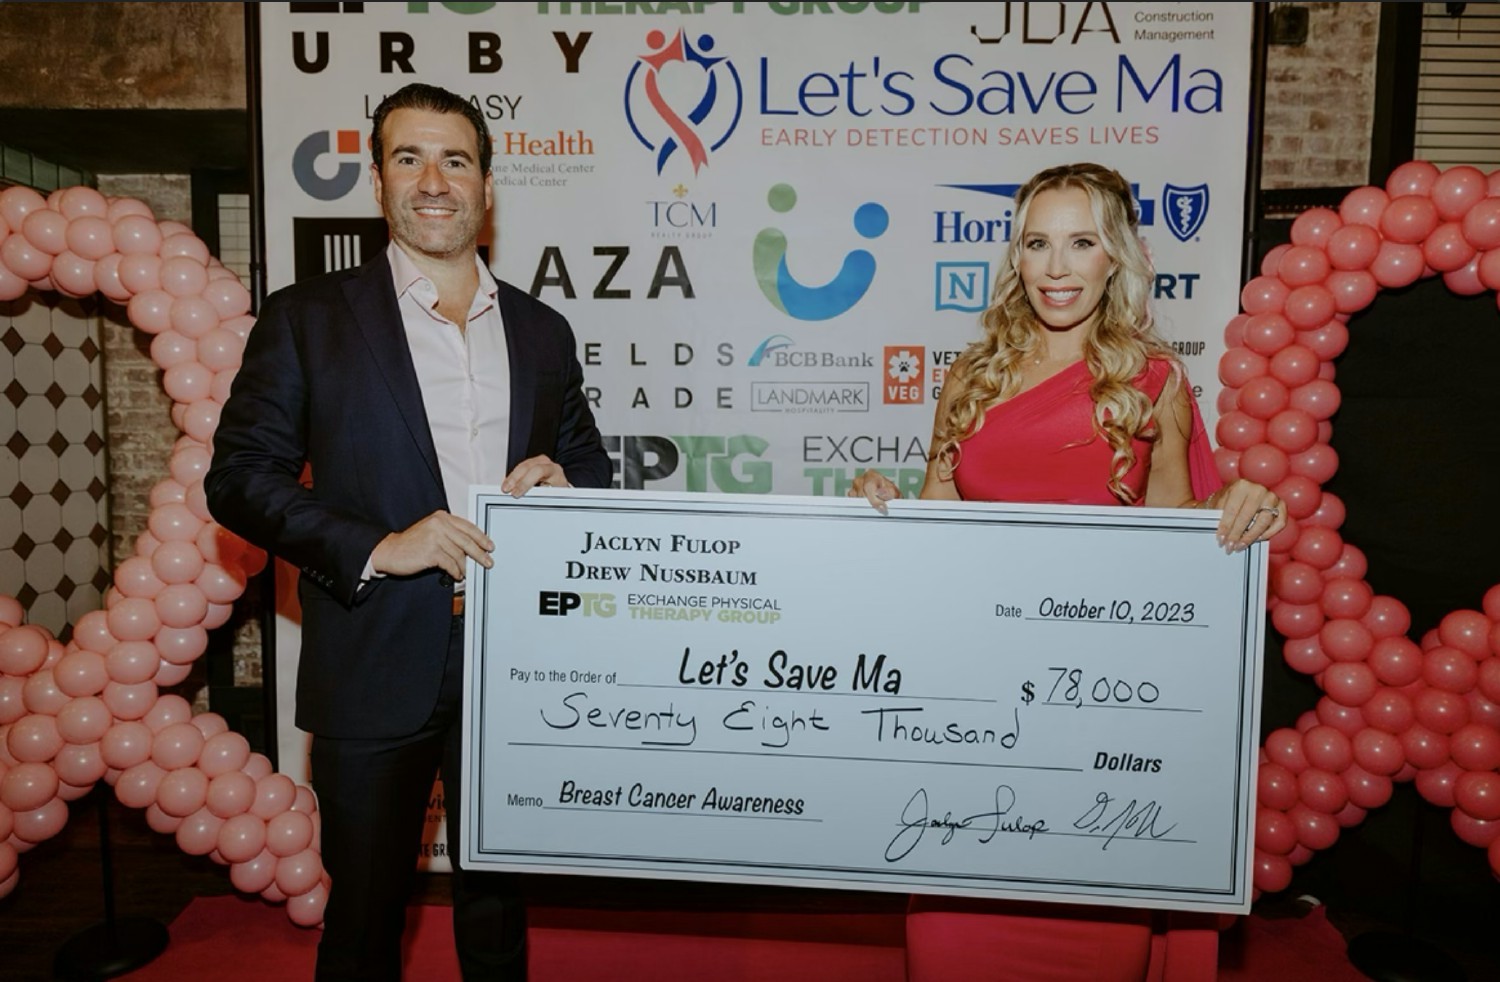 EPTG owners, Drew Nussbaum and Jaclyn Fulop, at Let's Save Ma fundraiser for Breast Cancer Awareness